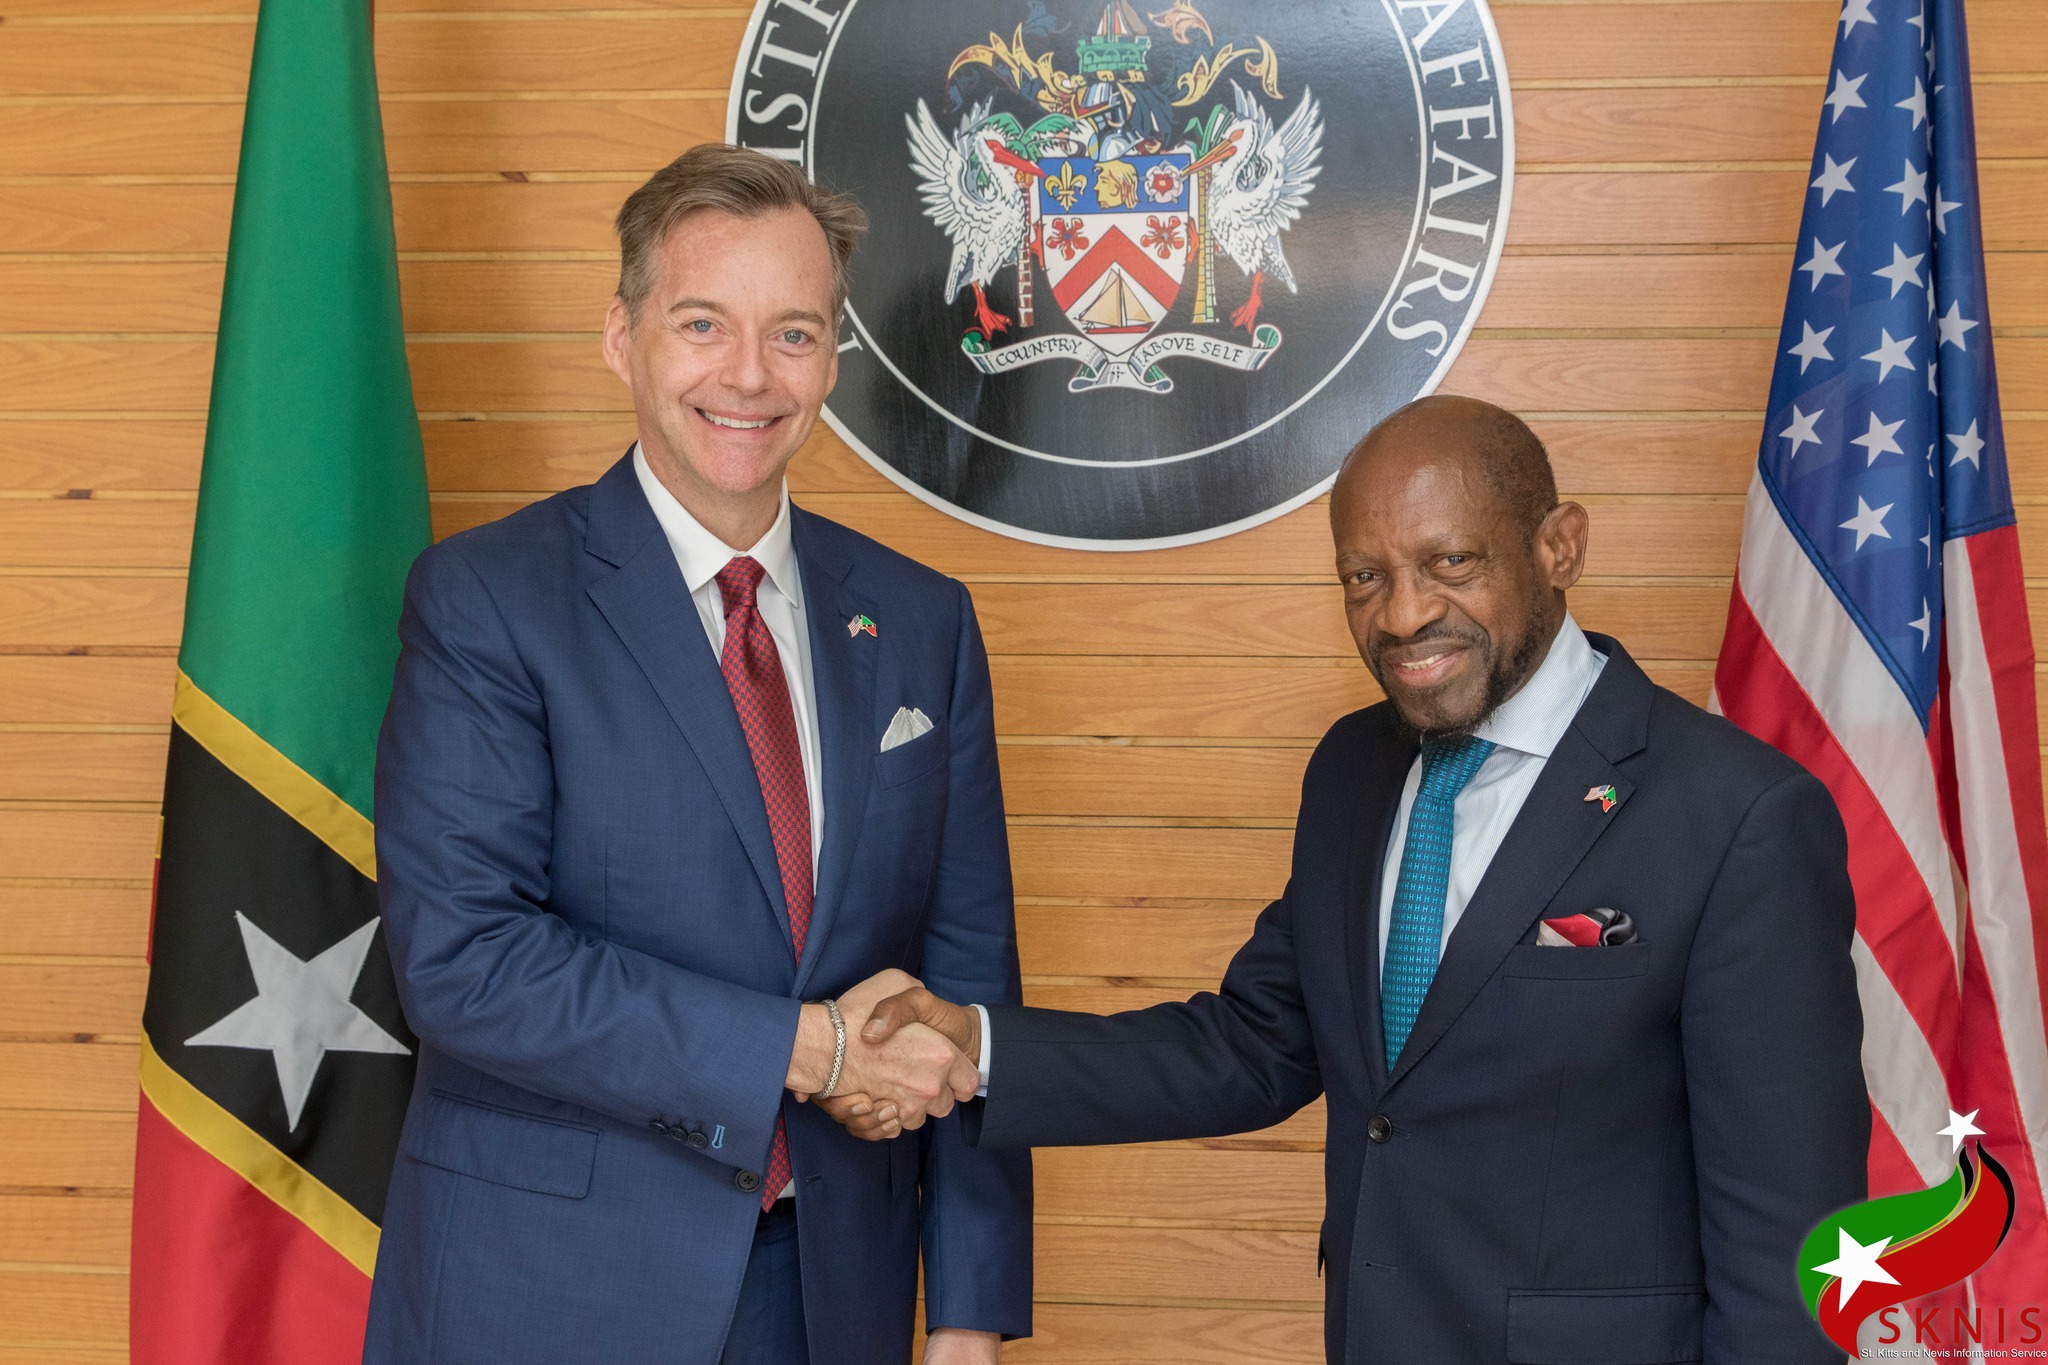 US Ambassador H.E. Roger Nyhus Meets with Foreign Minister Dr. Denzil Douglas to Discuss Shared Priorities